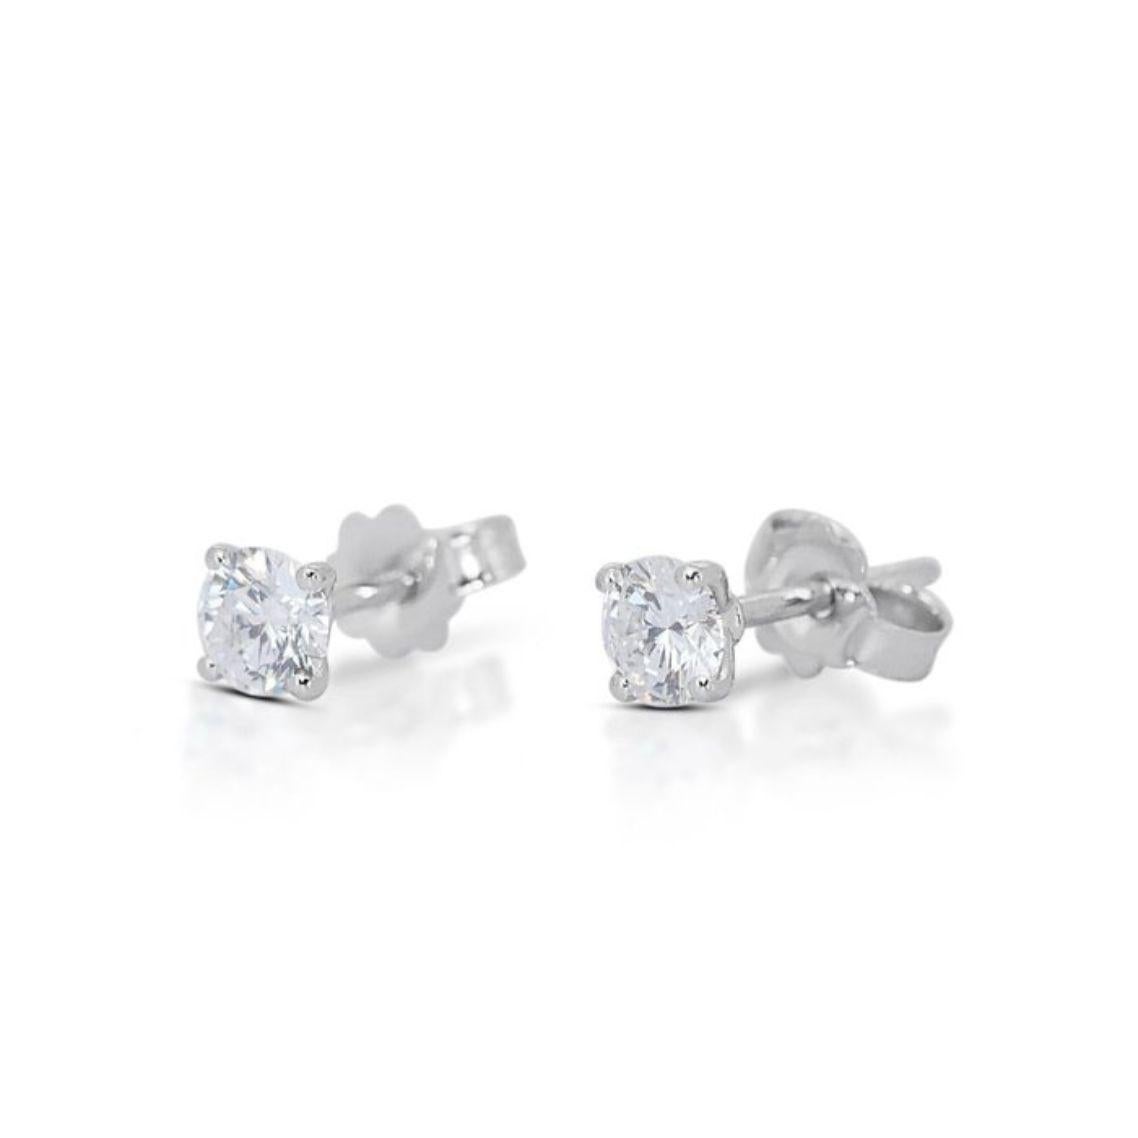 Embrace timeless beauty with these captivating 1.4 carat diamond stud earrings, meticulously crafted in polished 18K white gold. Each earring showcases a breathtaking Round Brilliant diamond, boasting an exceptional D color (highest color grade!)